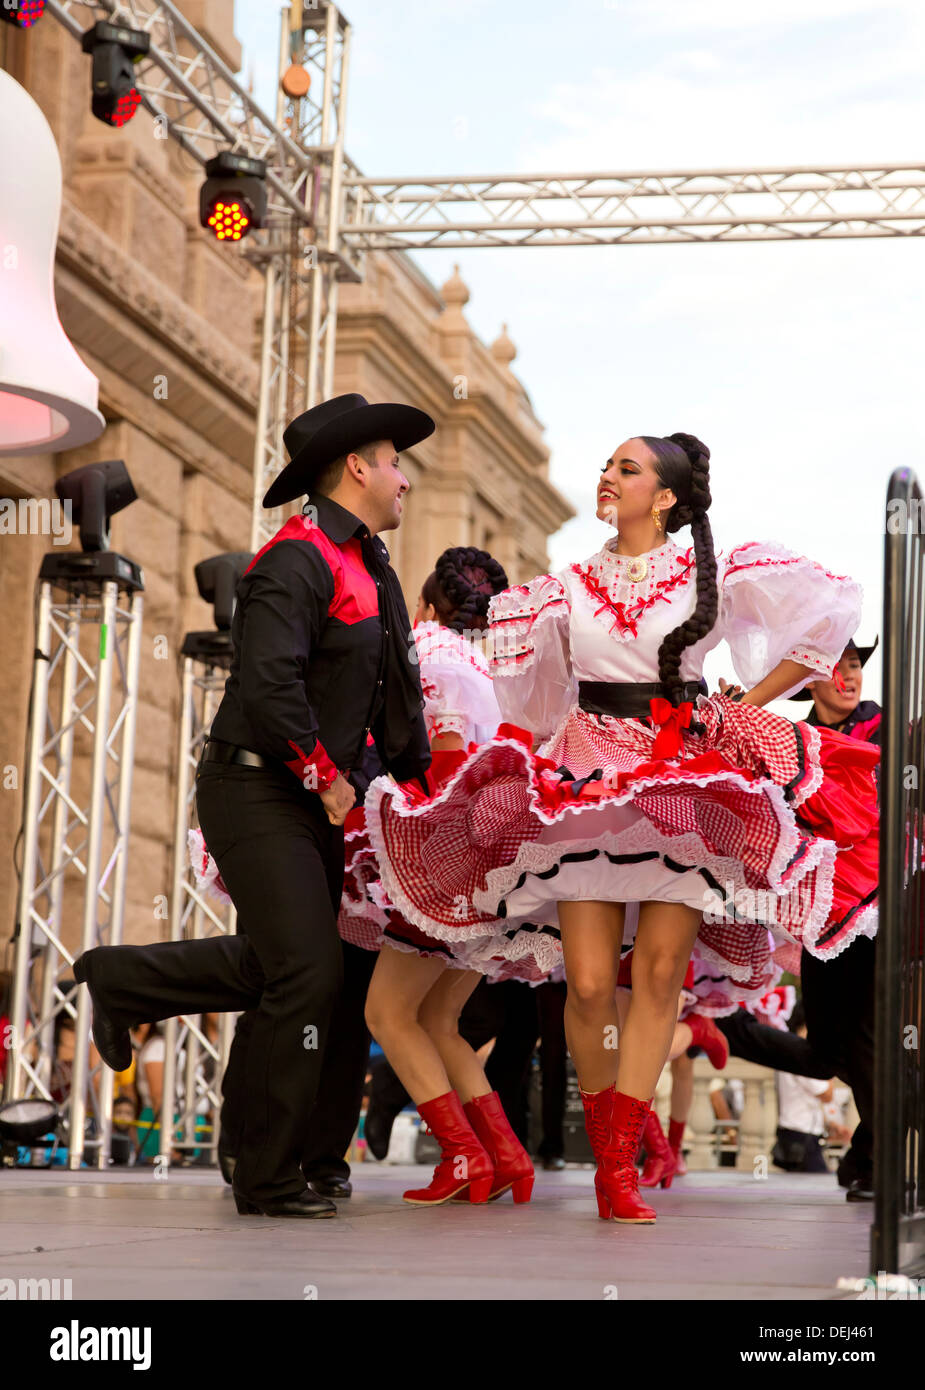 Mexican Independence day celebration at the Texas Capitol building in Austin includes traditional dances with colorful costumes Stock Photo